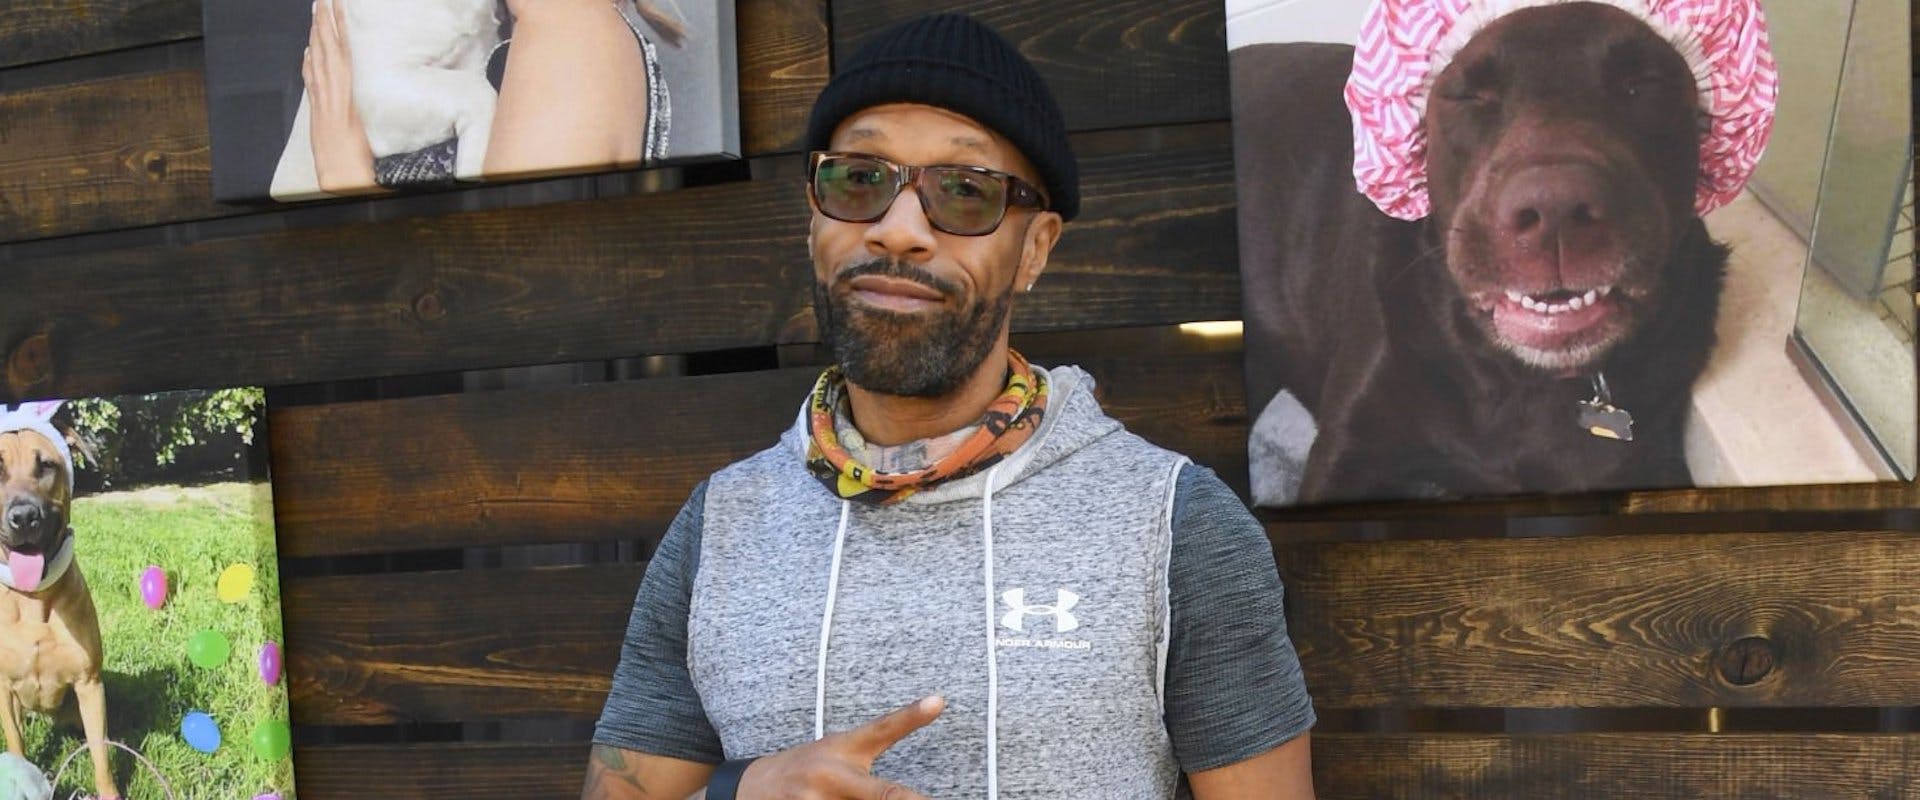 Redman attends Kathy Hilton x Halo Dog Collar National Pet Month Garden Party on April 26, 2022 in Bel Air, California. (Photo by Jon Kopaloff/Getty Images)